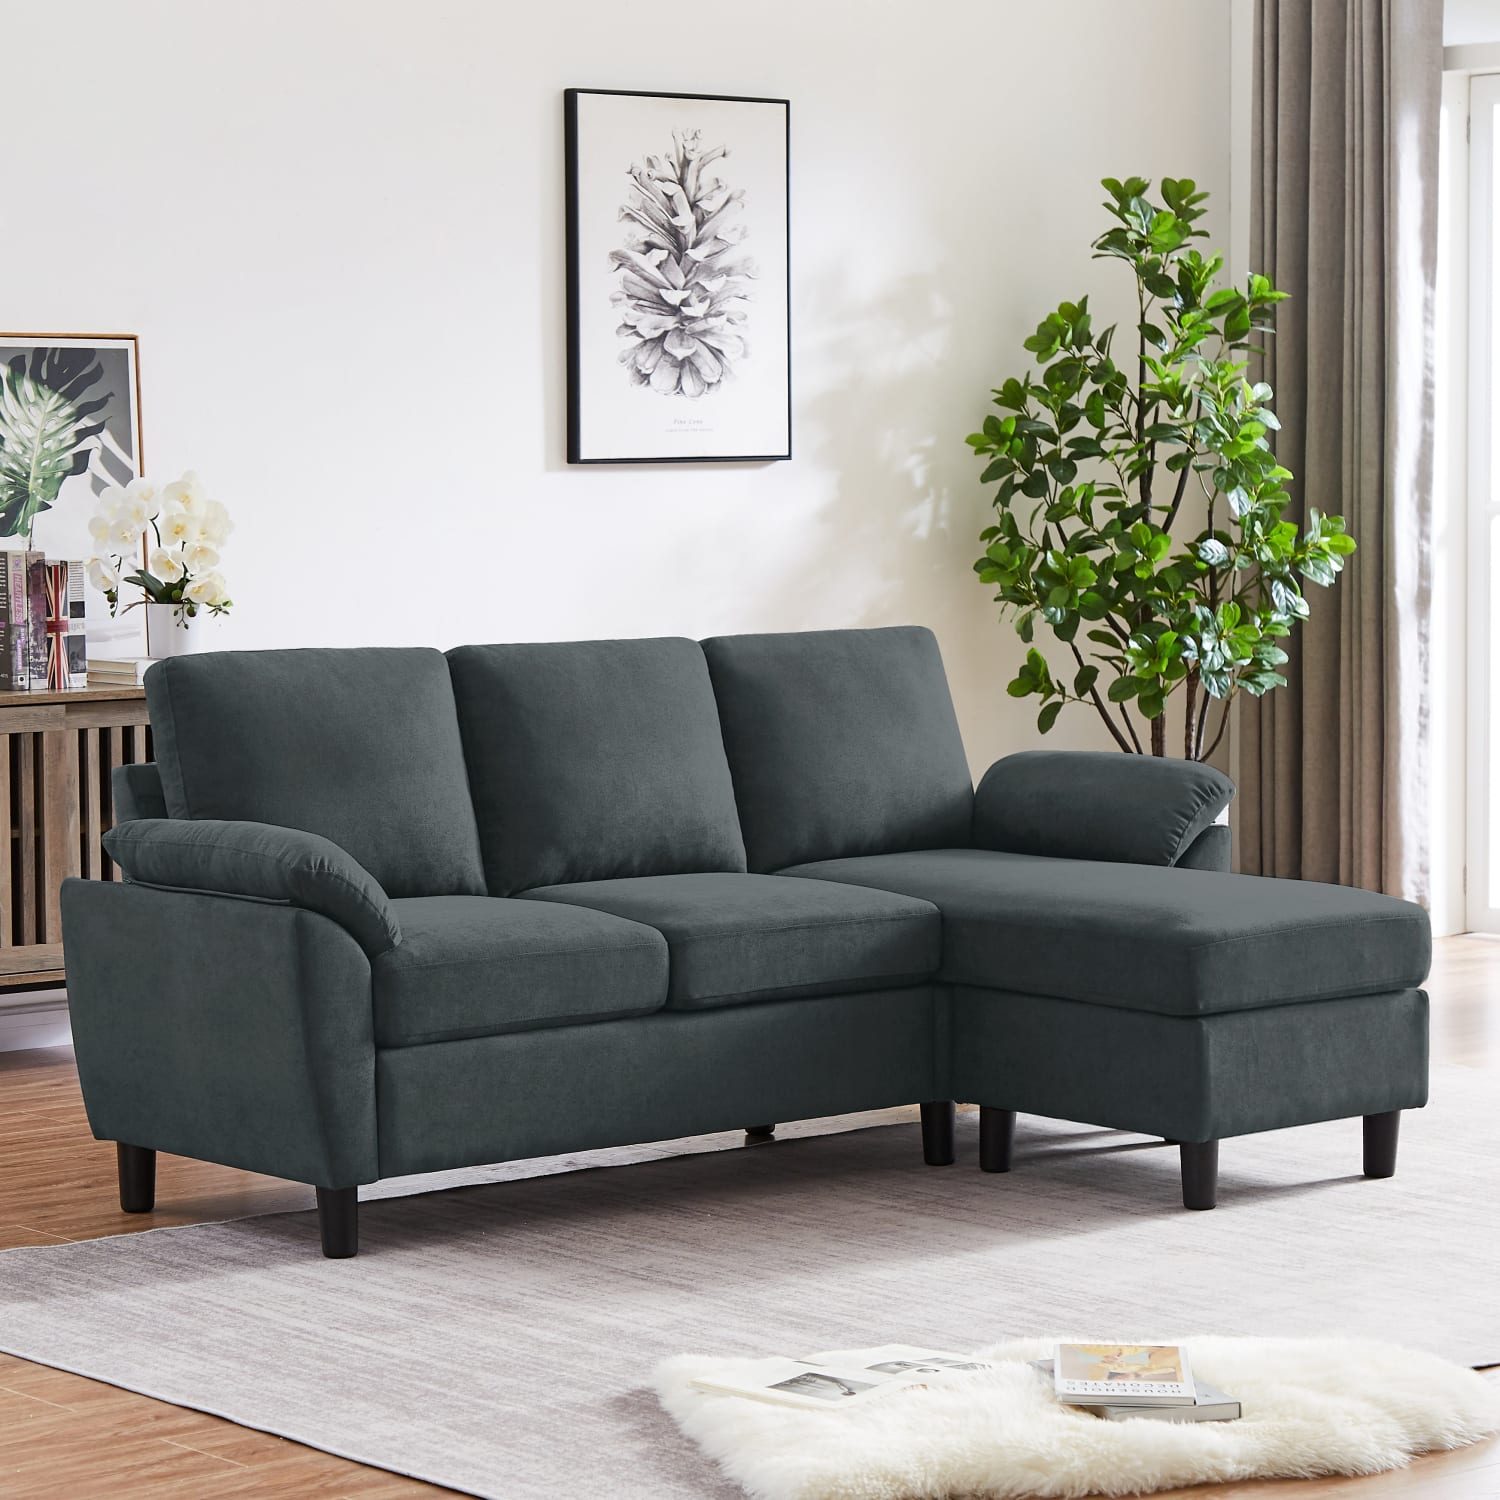 https://media-cldnry.s-nbcnews.com/image/upload/newscms/2023_20/1996121/jarenie-sofa-couch-upholstered-l-shape-sectional-sofas-sets-for-living-room-64664408d1959.jpg